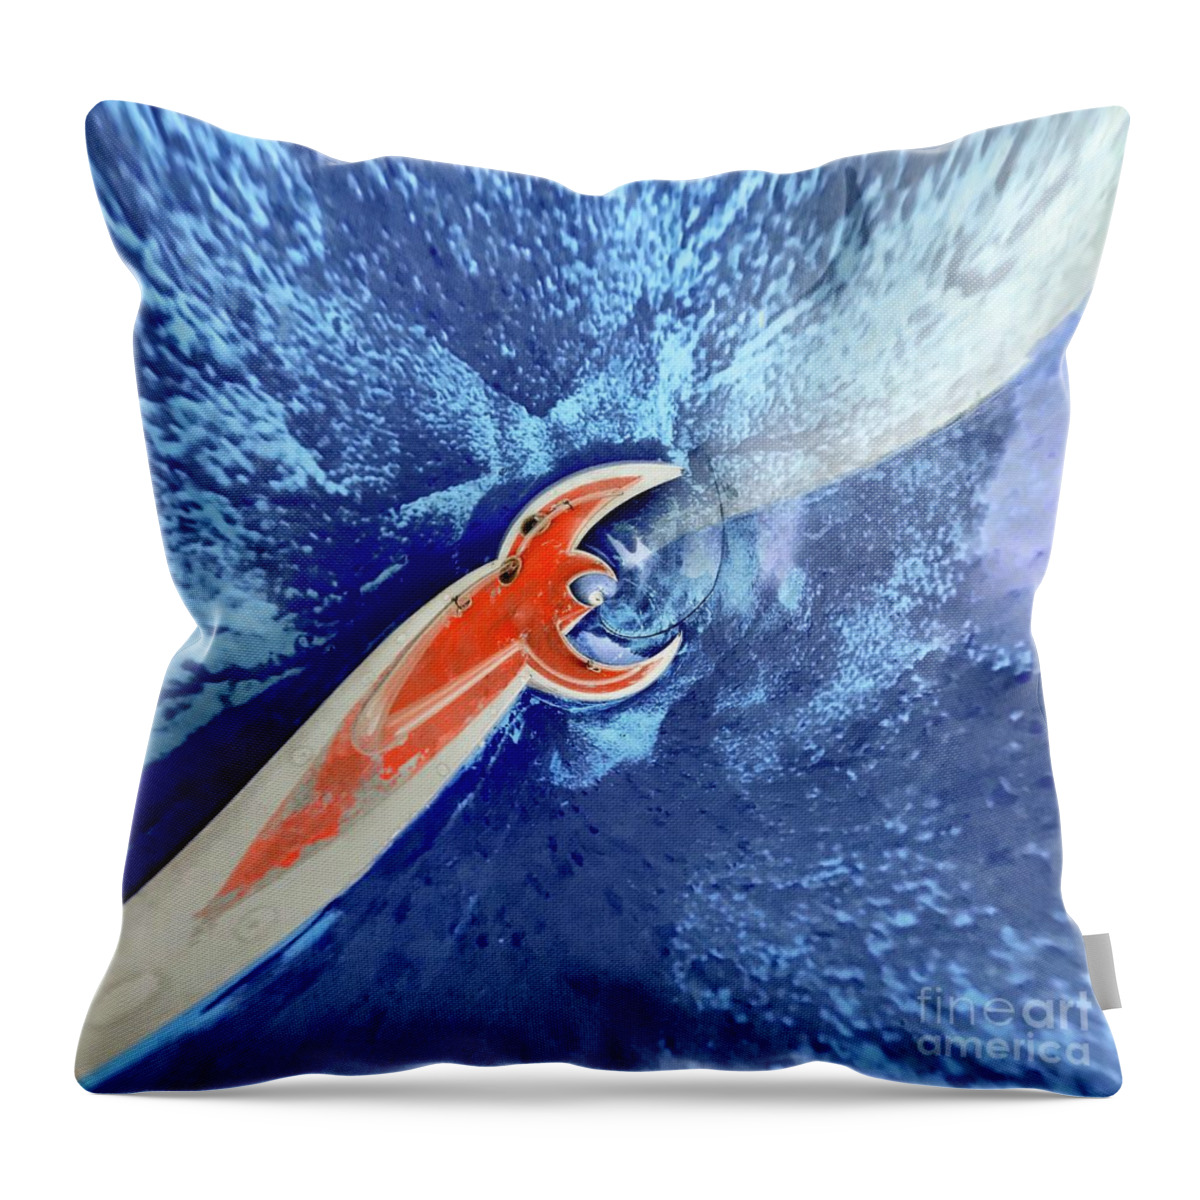 Blue Yonder Throw Pillow featuring the photograph Blue Yonder by Terry Rowe